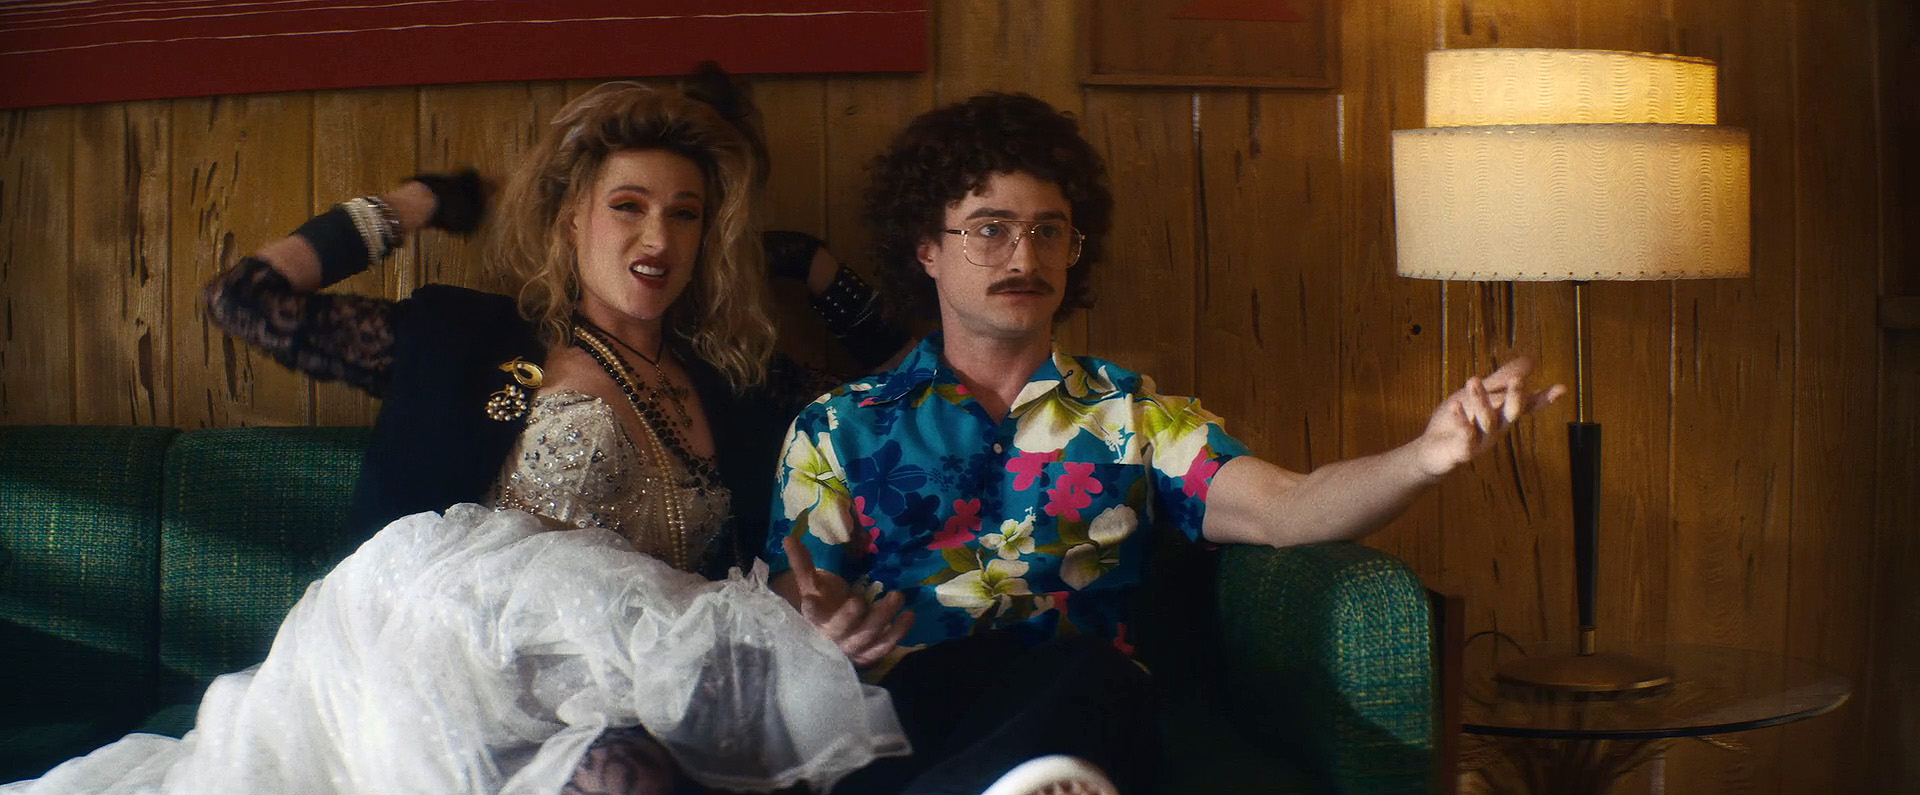 Evan Rachel Wood as Madonna and Daniel Radcliffe as "Weird" Al Yankovic sitting on couch and looking confused in "Weird: The Al Yankovic Story"